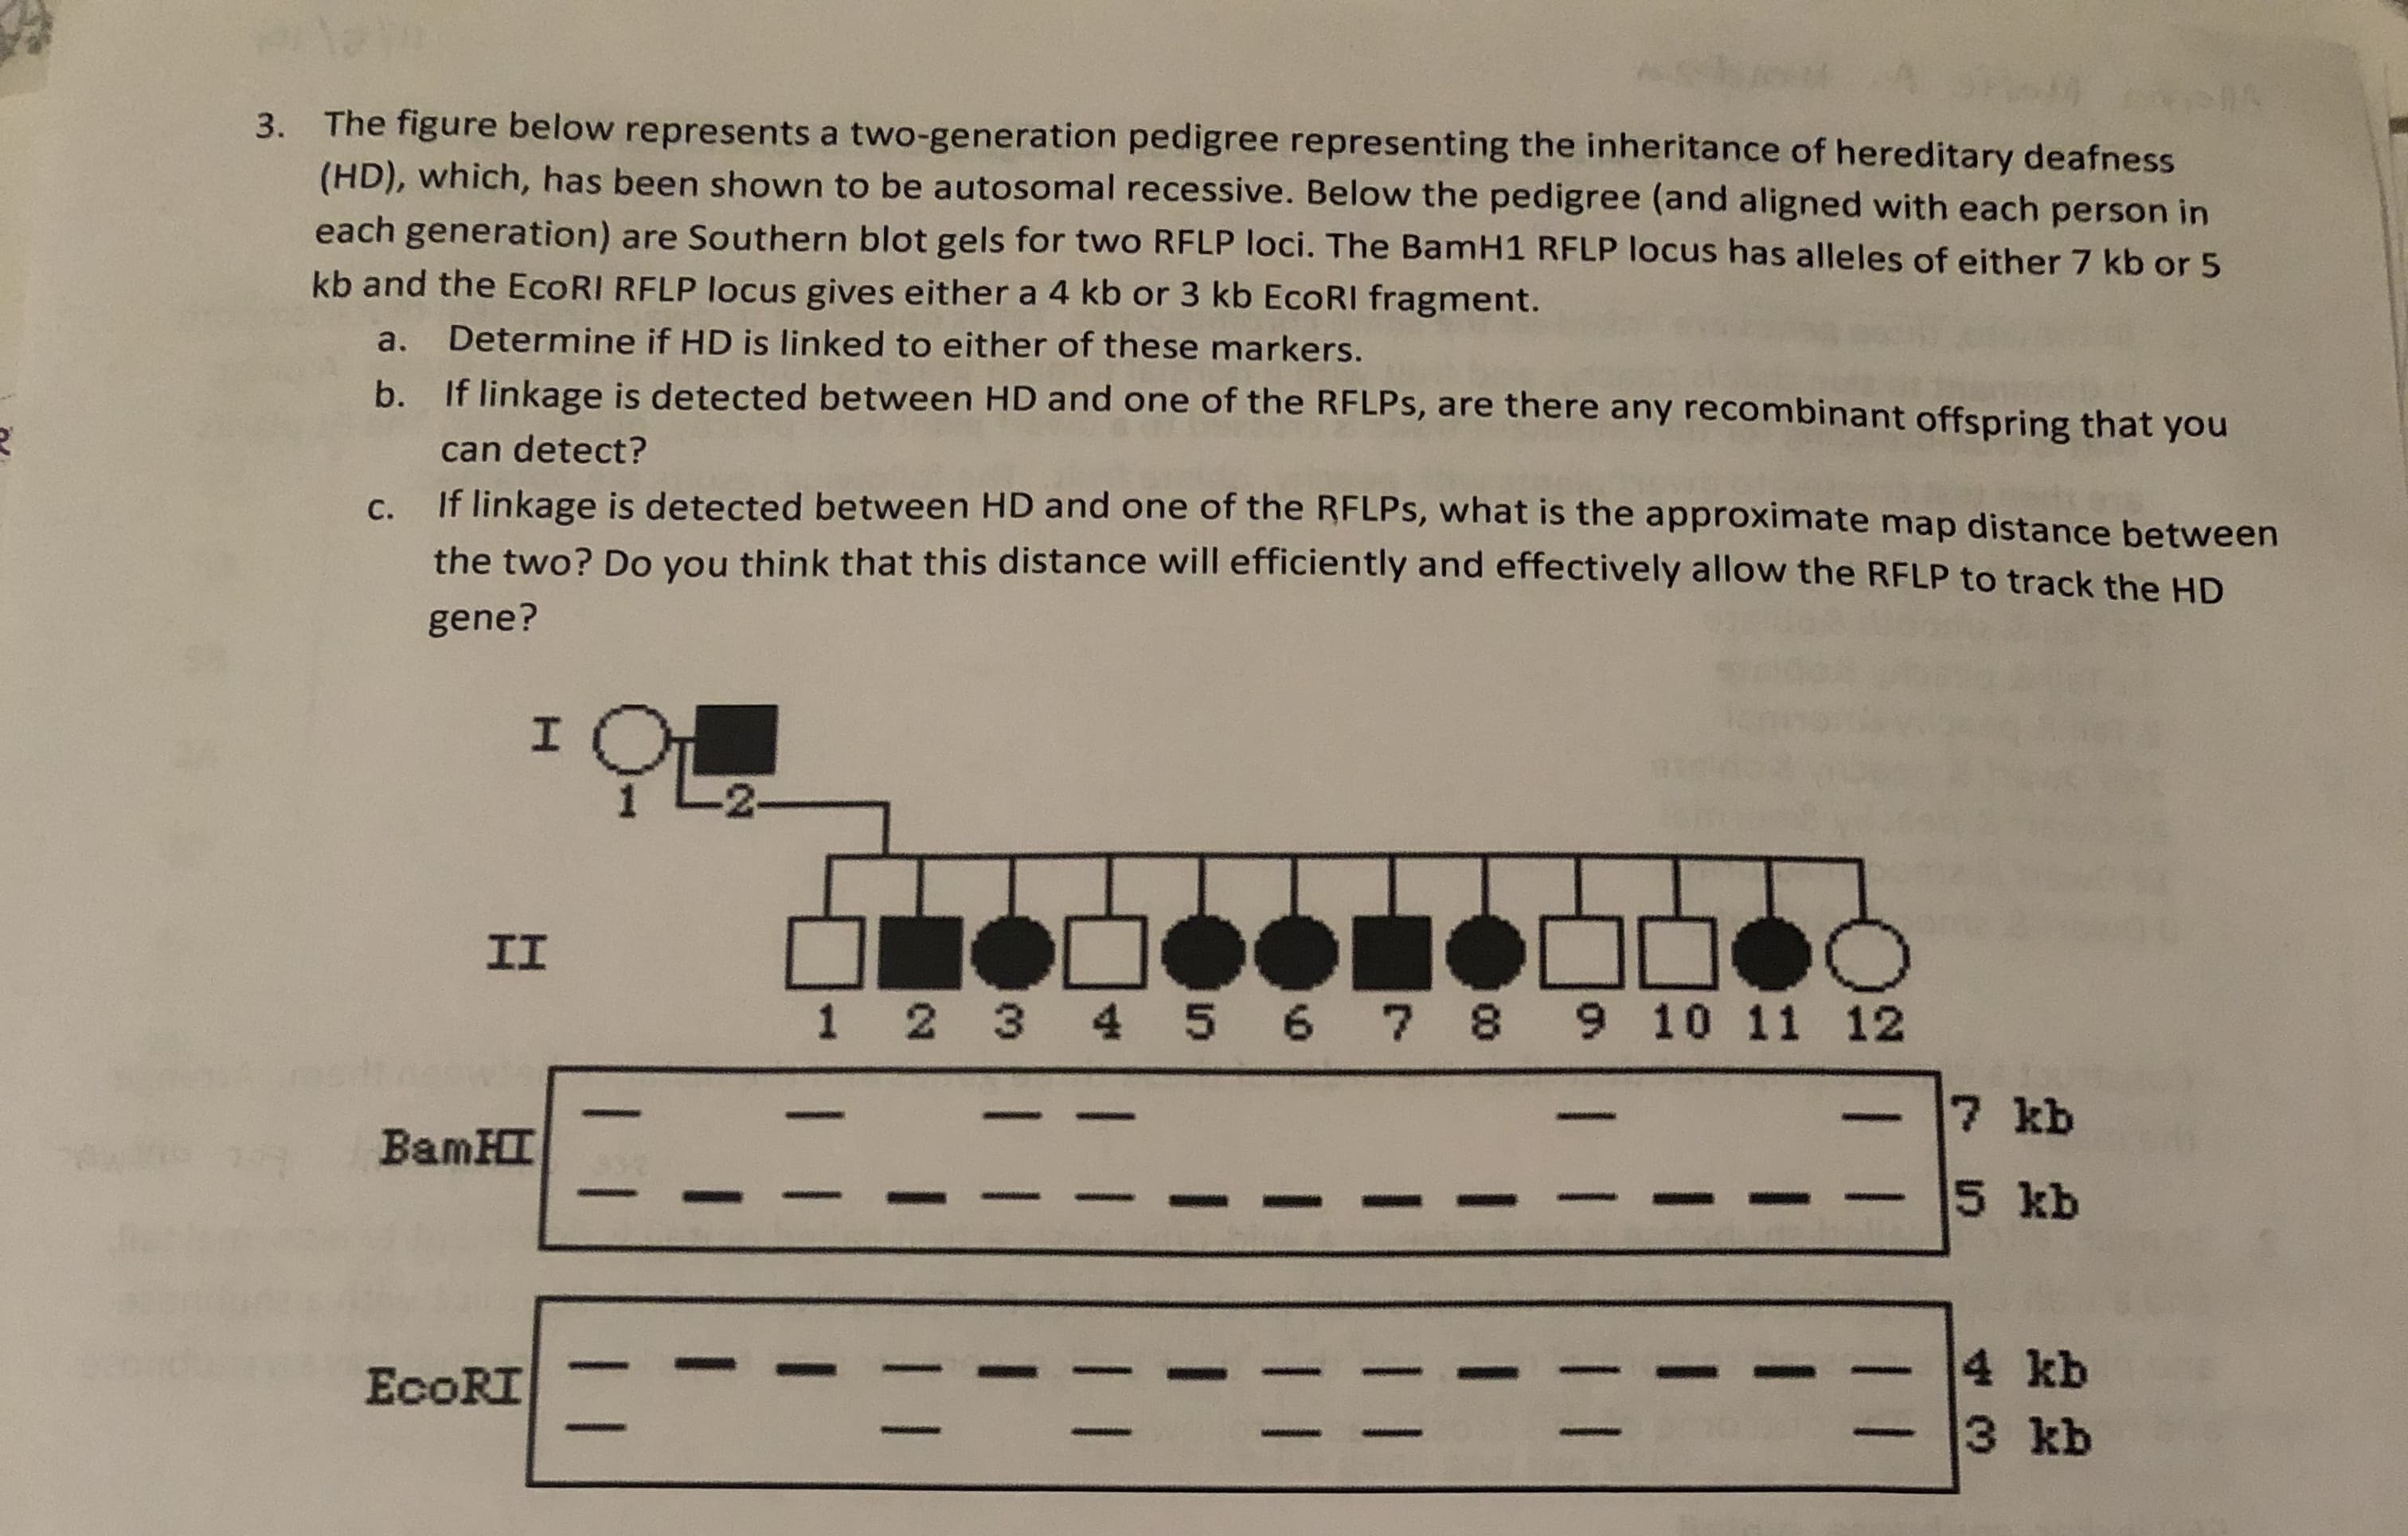 S2
A
3. The figure below represents a two-generation pedigree representing the inheritance of hereditary deafness
(HD), which, has been shown to be autosomal recessive. Below the pedigree (and aligned with each person in
each generation) are Southern blot gels for two RFLP loci. The BamH1 RFLP locus has alleles of either 7 kb or 5
kb and the EcoRI RFLP locus gives either a 4 kb or 3 kb EcoRI fragment.
Determine if HD is linked to either of these markers.
a.
If linkage is detected between HD and one of the RFLPS, are there any recombinant offspring that you
b.
can detect?
If linkage is detected between HD and one of the RFLPs, what is the approximate map distance between
the two? Do you think that this distance will efficiently and effectively allow the RFLP to track the HD
C.
gene?
I
II
1 2 3 4 5 6 7 8 9 10 11 12
7 kb
BamHI
SS8
5 kb
4 kb
3 kb
EcoRI
